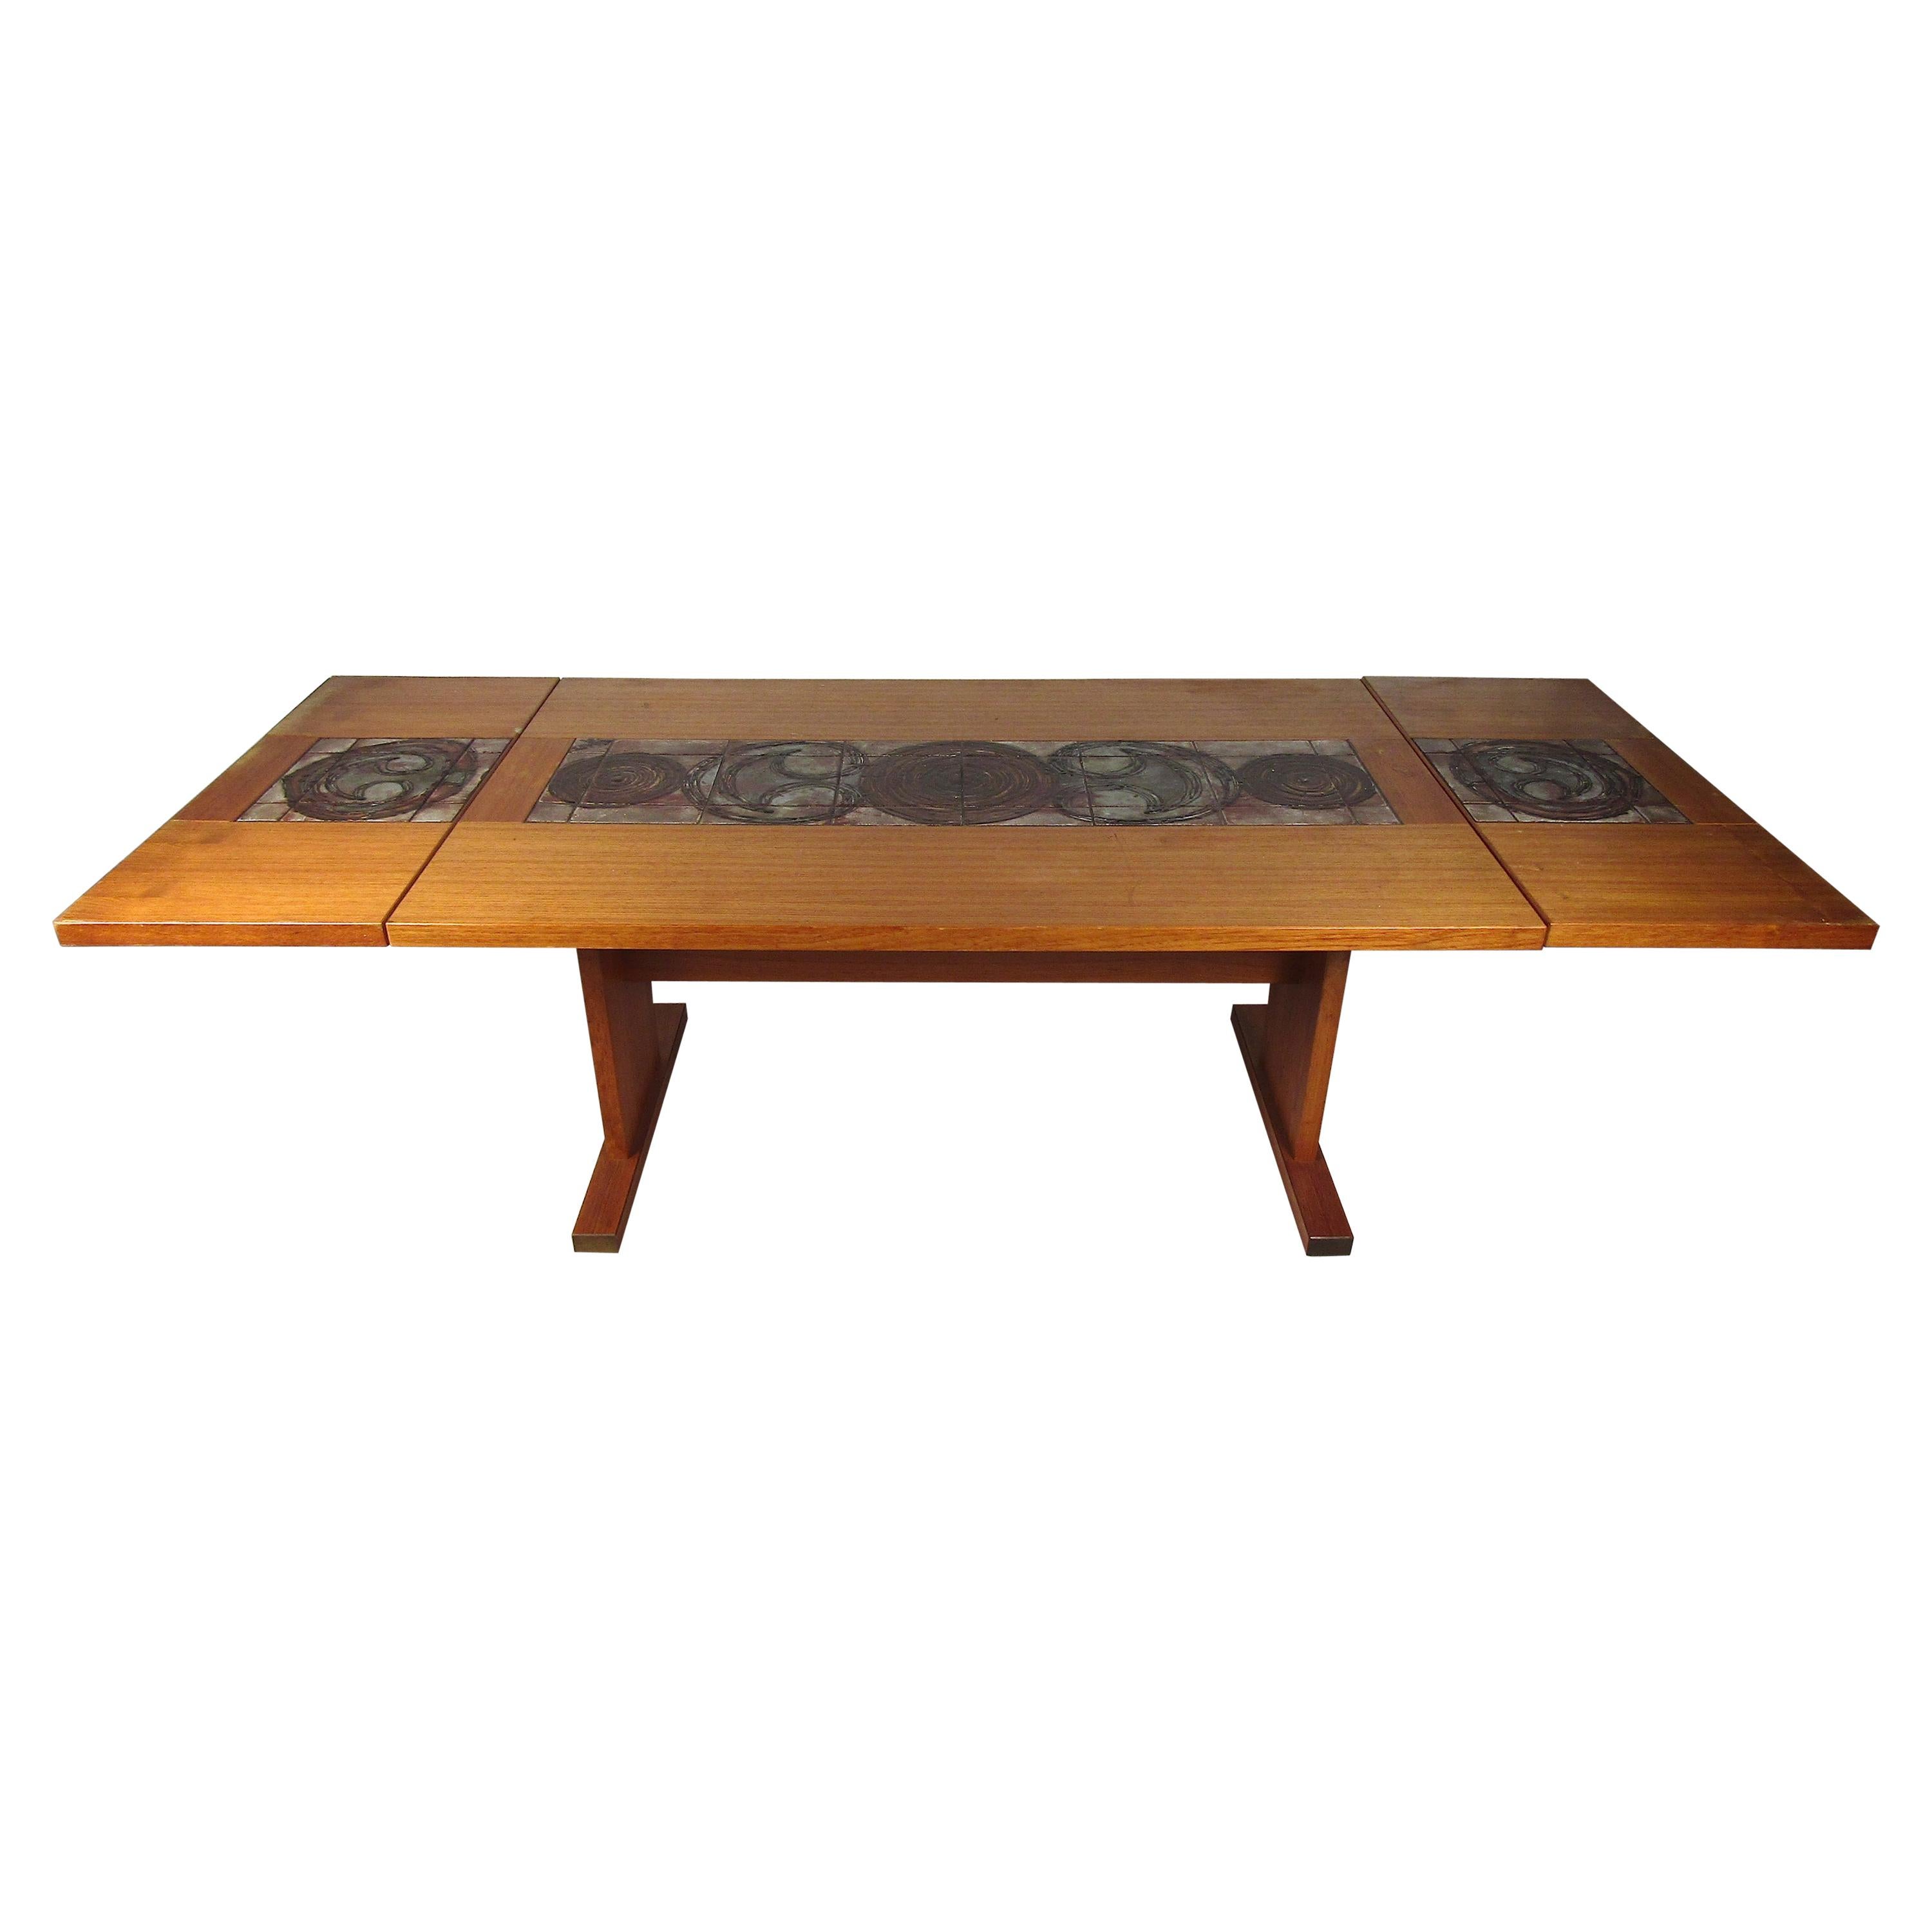 Danish Modern Drop-Leaf Dining Table with Tile Inlays